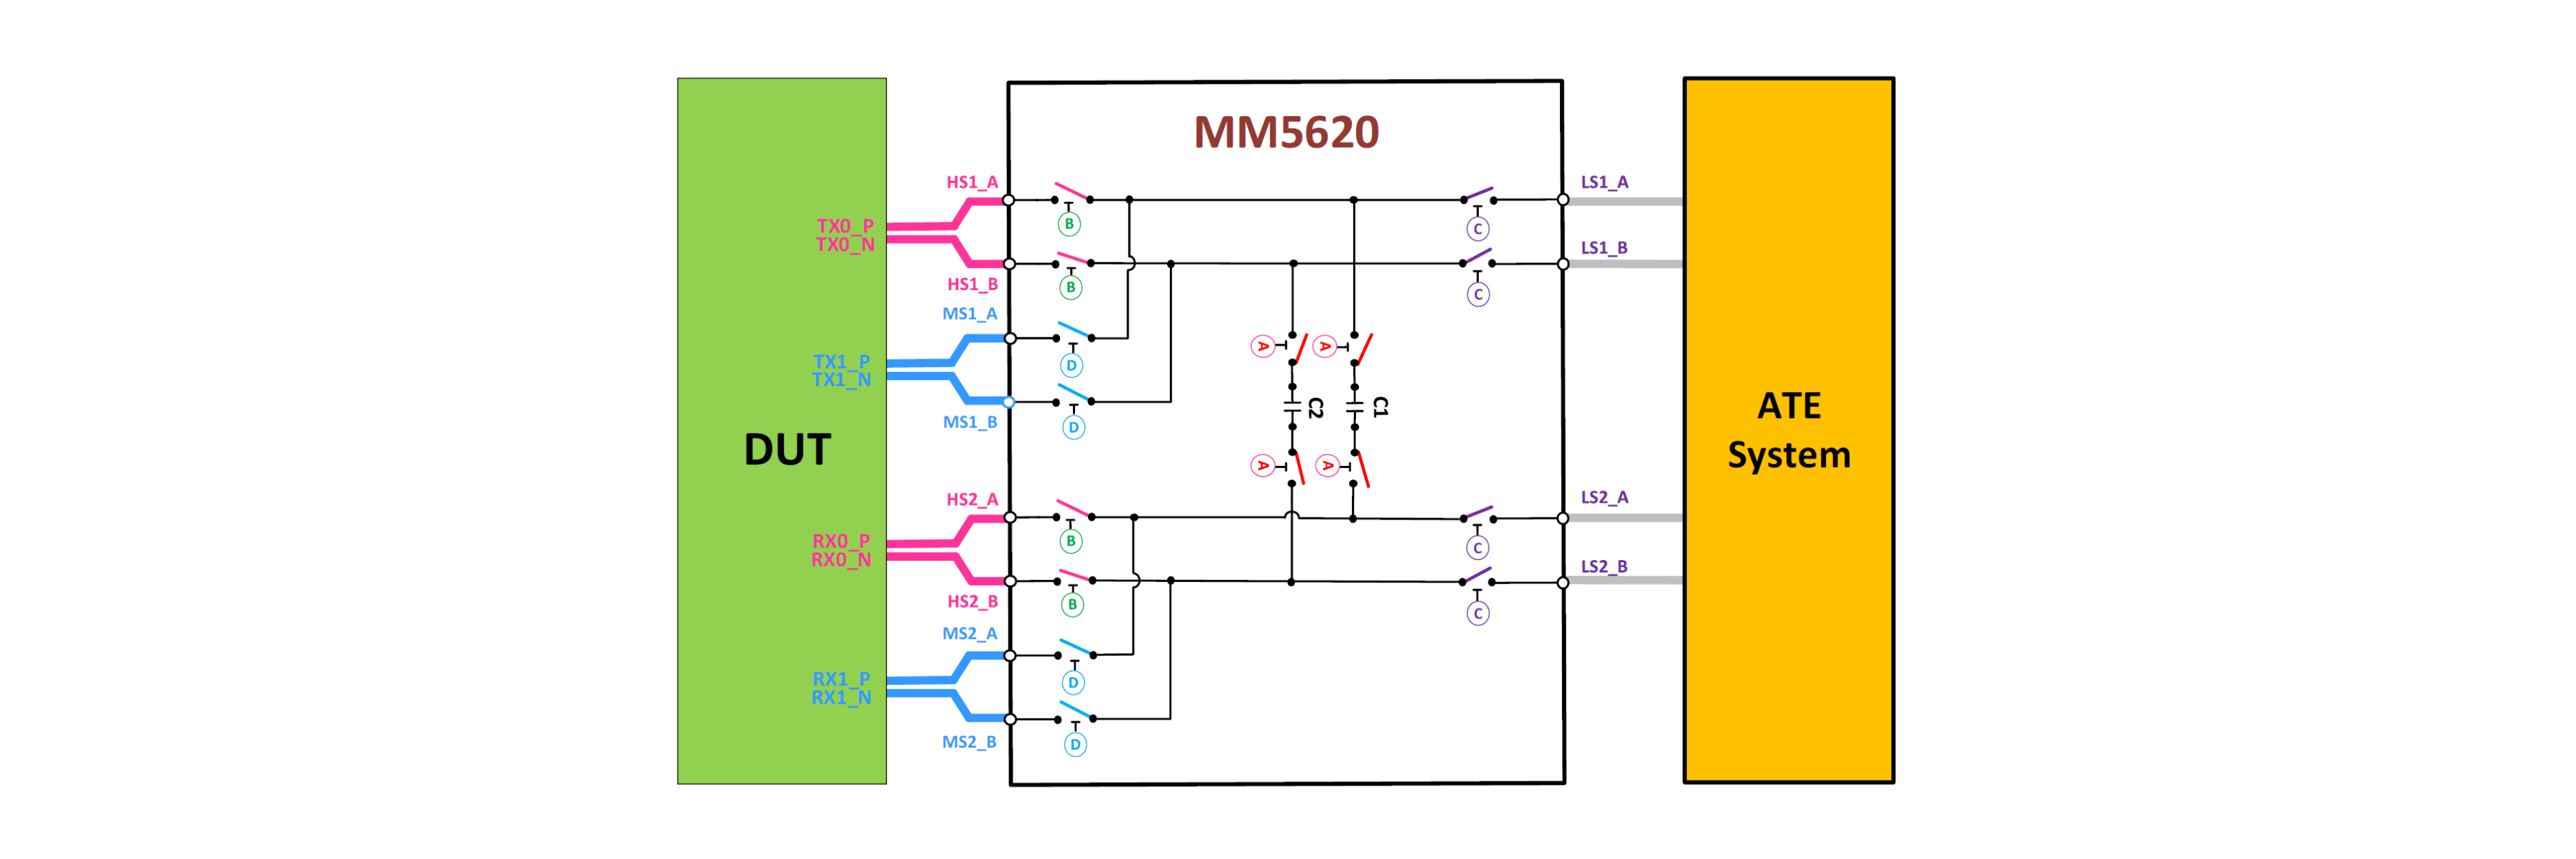 MM5620 - Double Density HSIO Loopback Mode Test